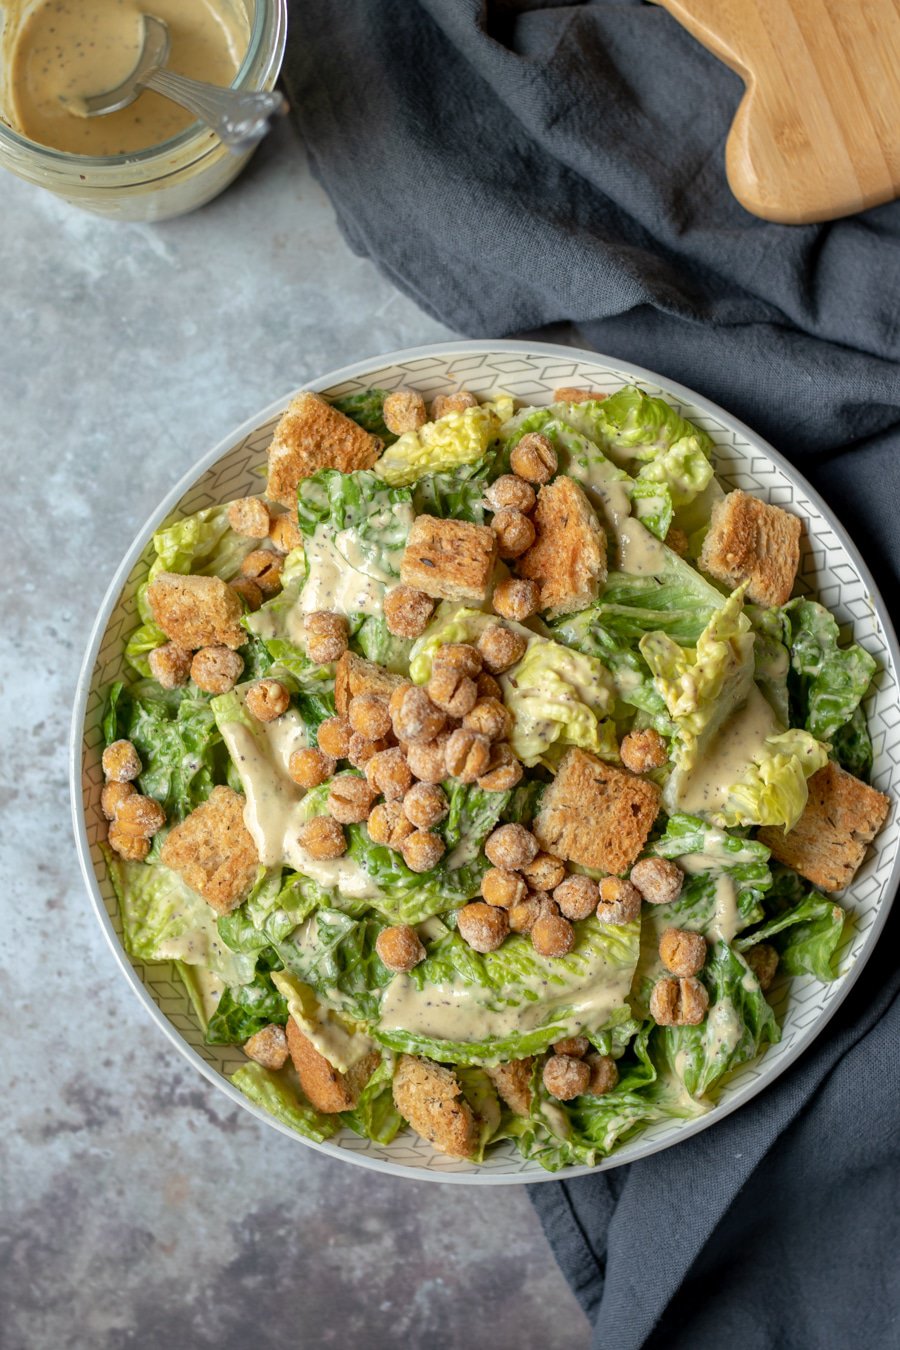 Vegan Caesar Salad with Croutons and Roasted Chickpeas in a large bowl.